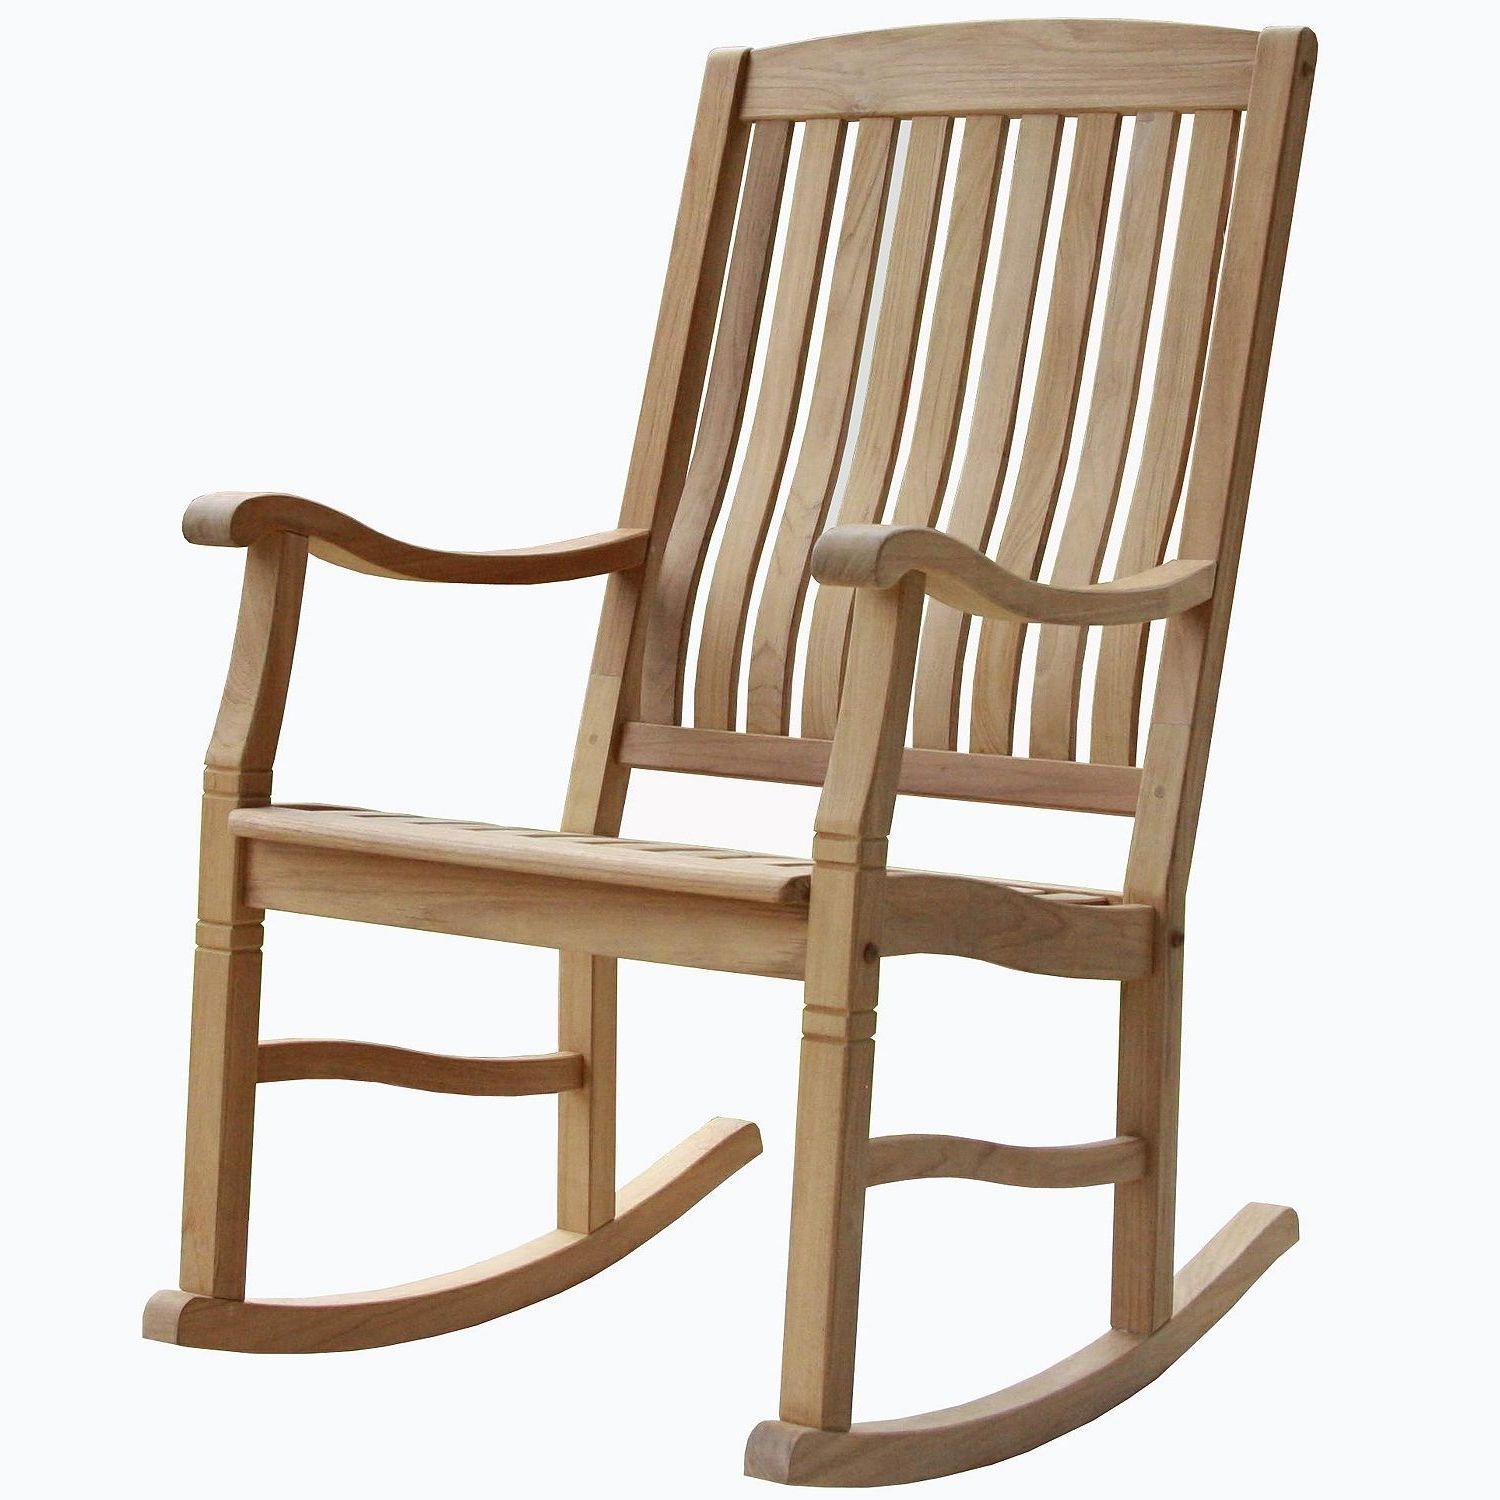 Widely Used Rocking Chairs At Sam\'s Club Intended For Teak Rocking Chair – Sam's Club–these Are The Ones We Have In N2 (Photo 8 of 15)